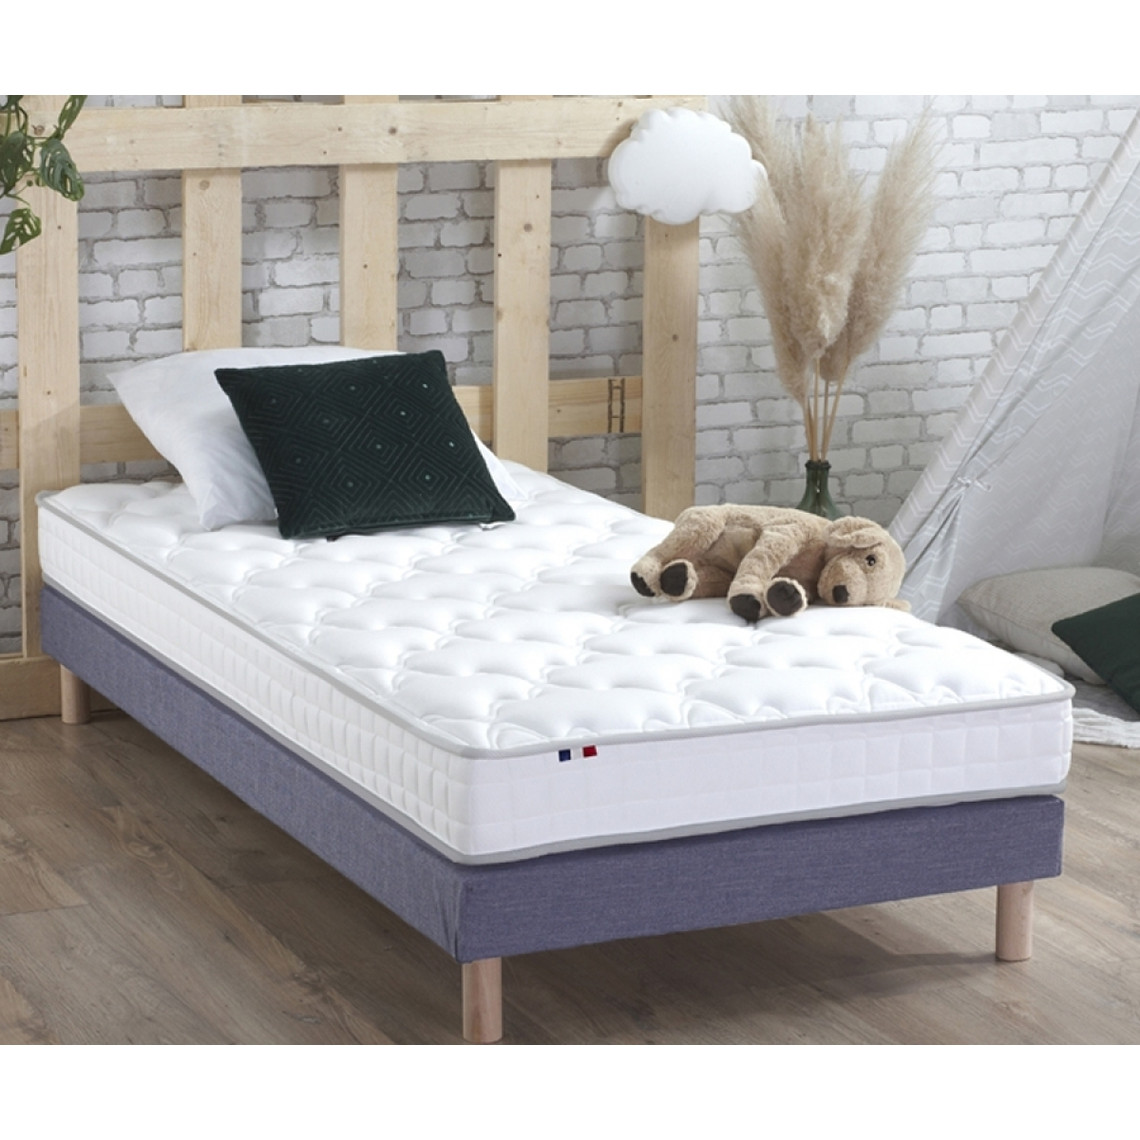 Idliterie Matelas Mousse Haute Résilience + Latex 3 zones ESSENCE - made in France